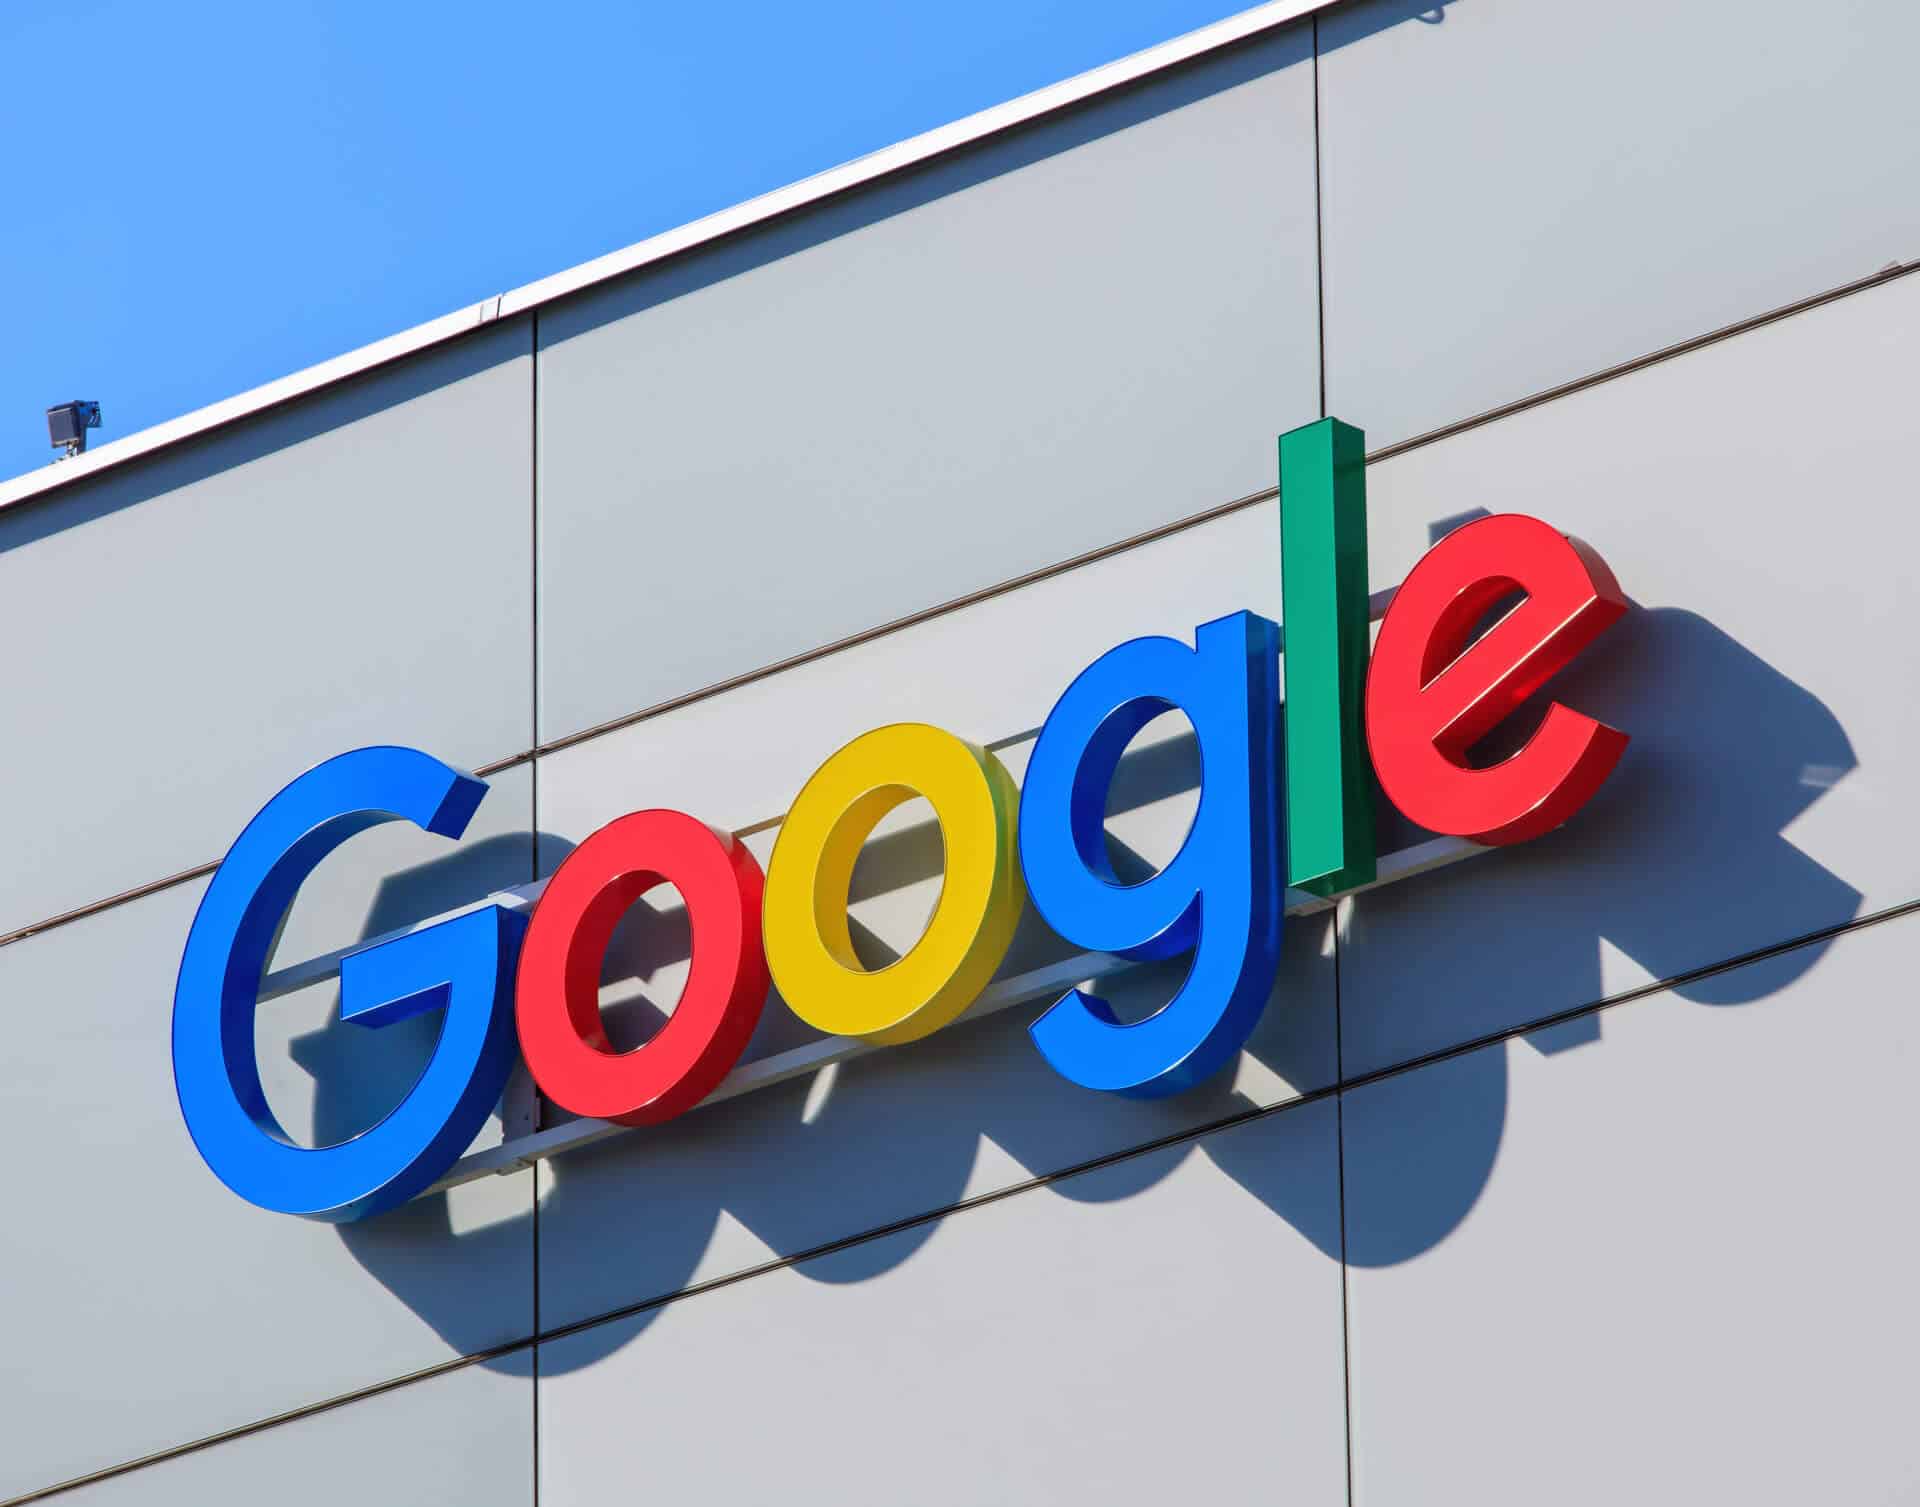 Google to delete billions of user browsing data to settle consumer privacy lawsuit